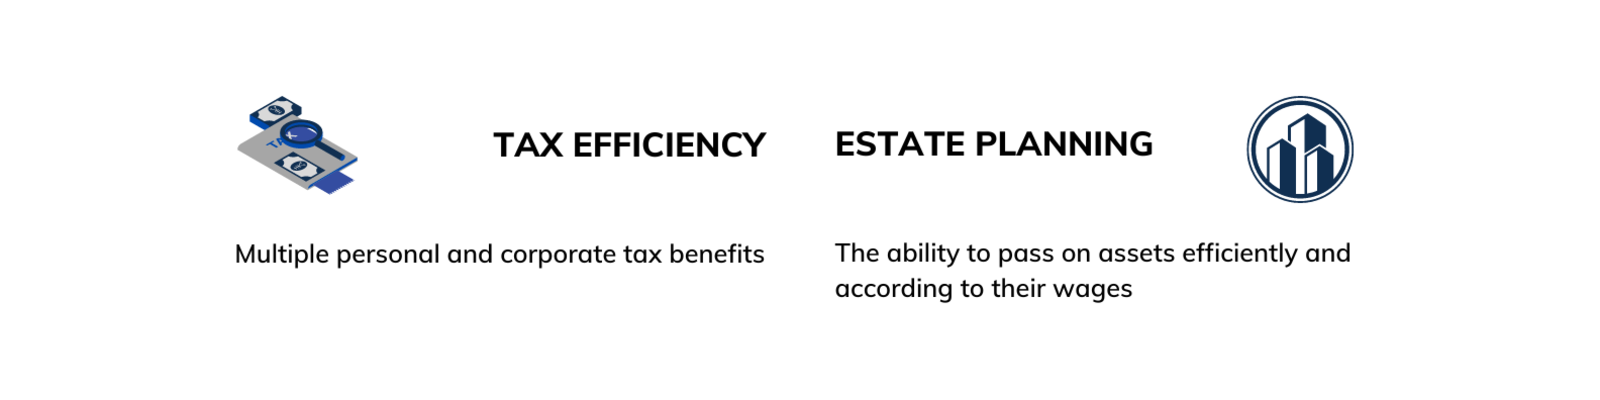 Benefits of residency and citizenship programmes - Tax efficiency and estate planning